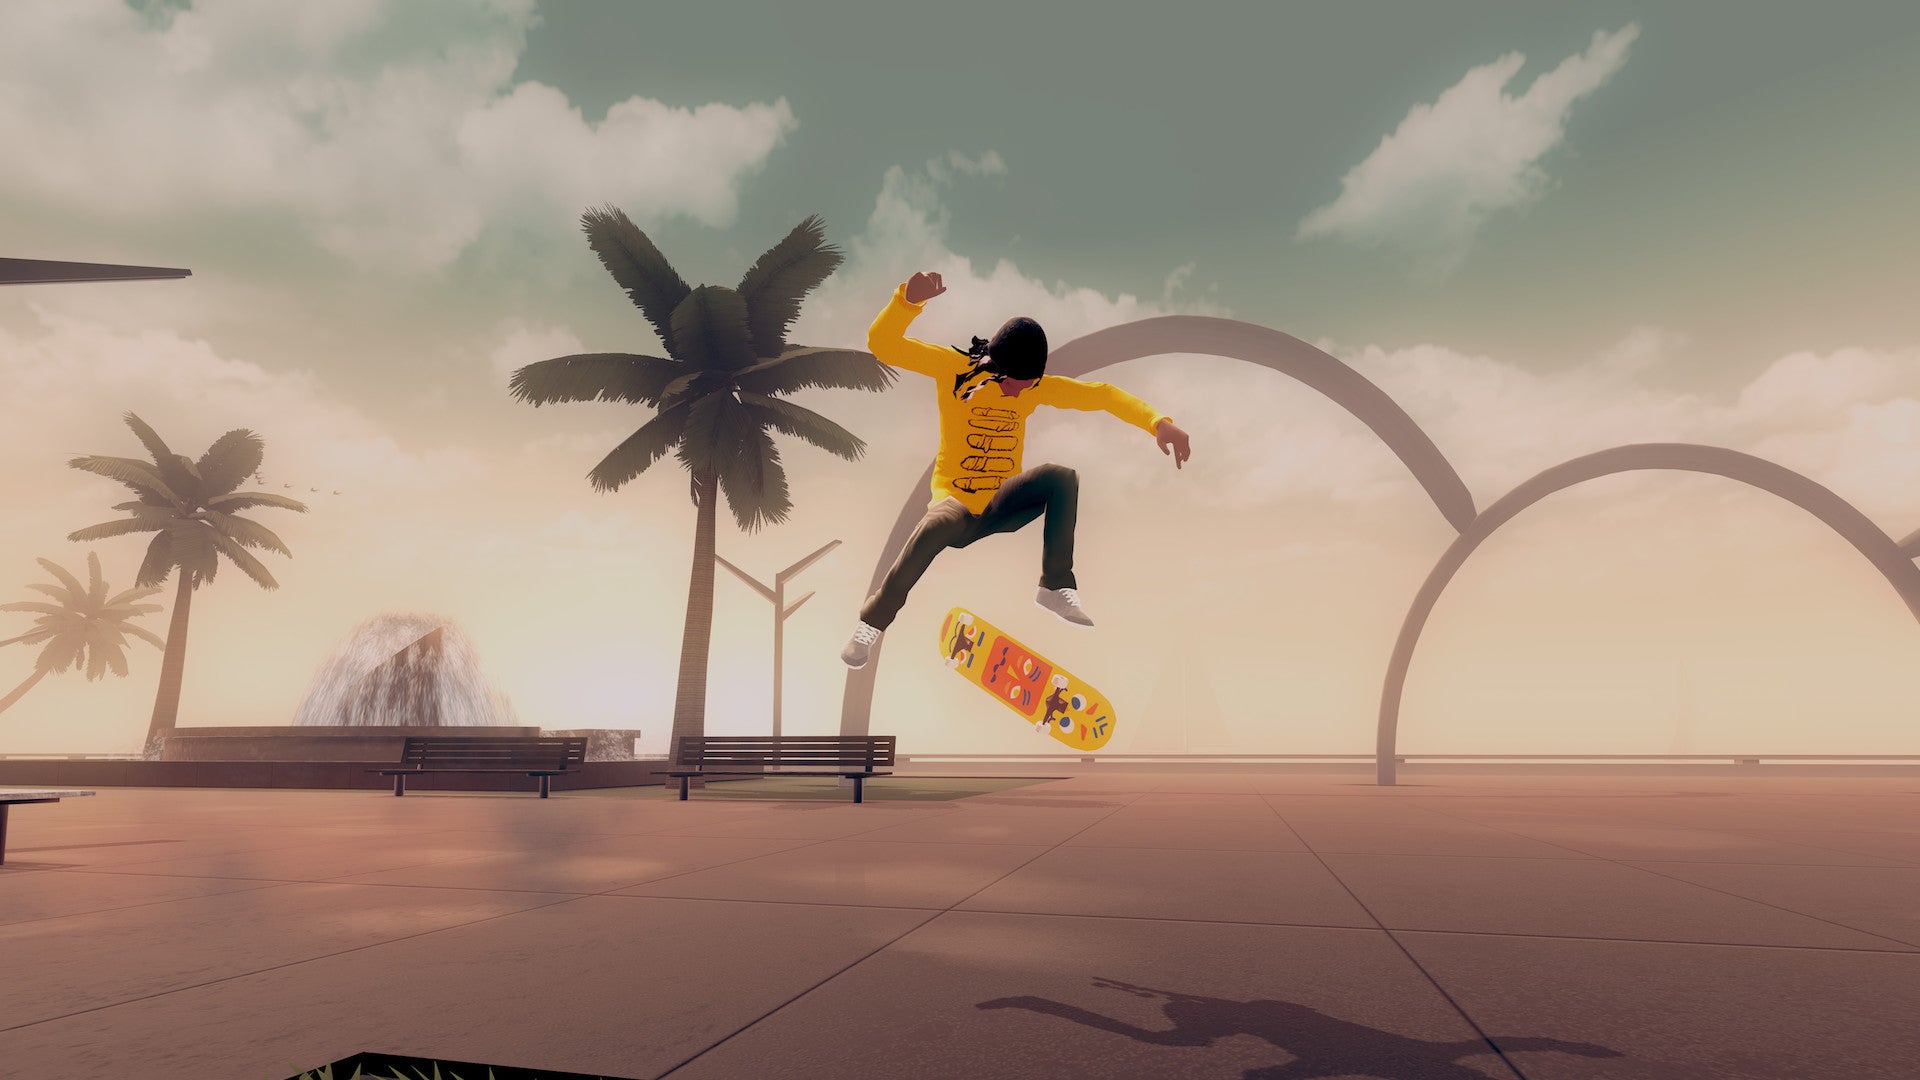 A skateboarder mid-air during a trick in a Skate City screenshot.